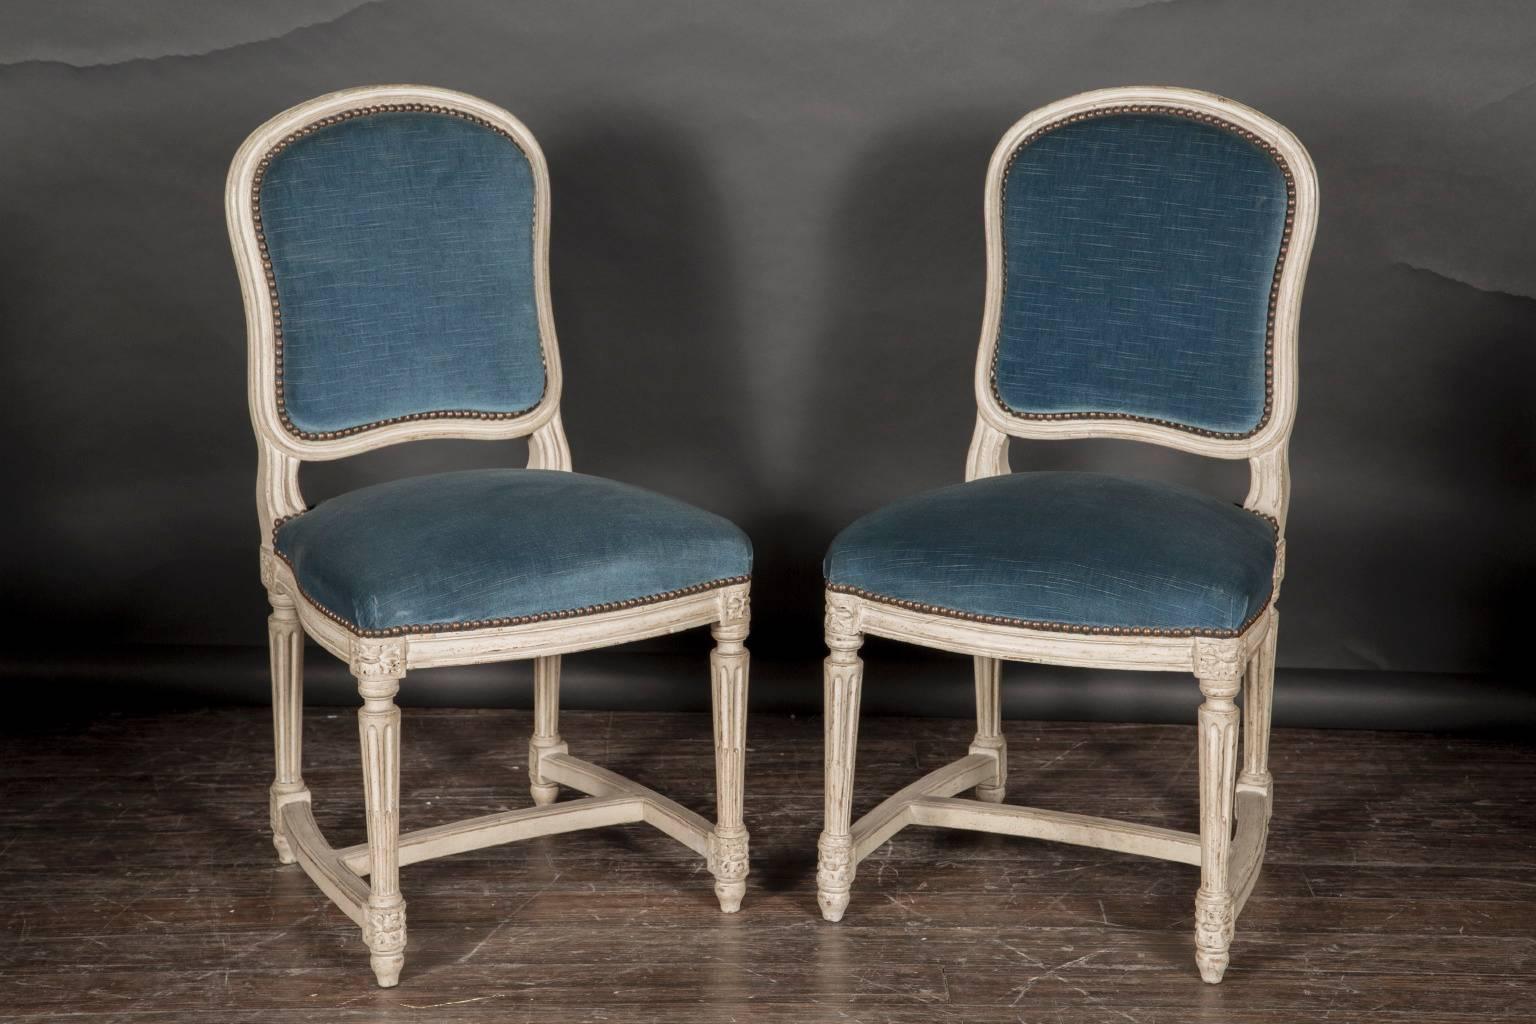 Here we have a set of ten painted side chairs from the 19th century, an excellent set to go around a table, or interspersed throughout a room. The stretchers of the chair are upholstered in blue velvet, complementing marvelously the wood painted